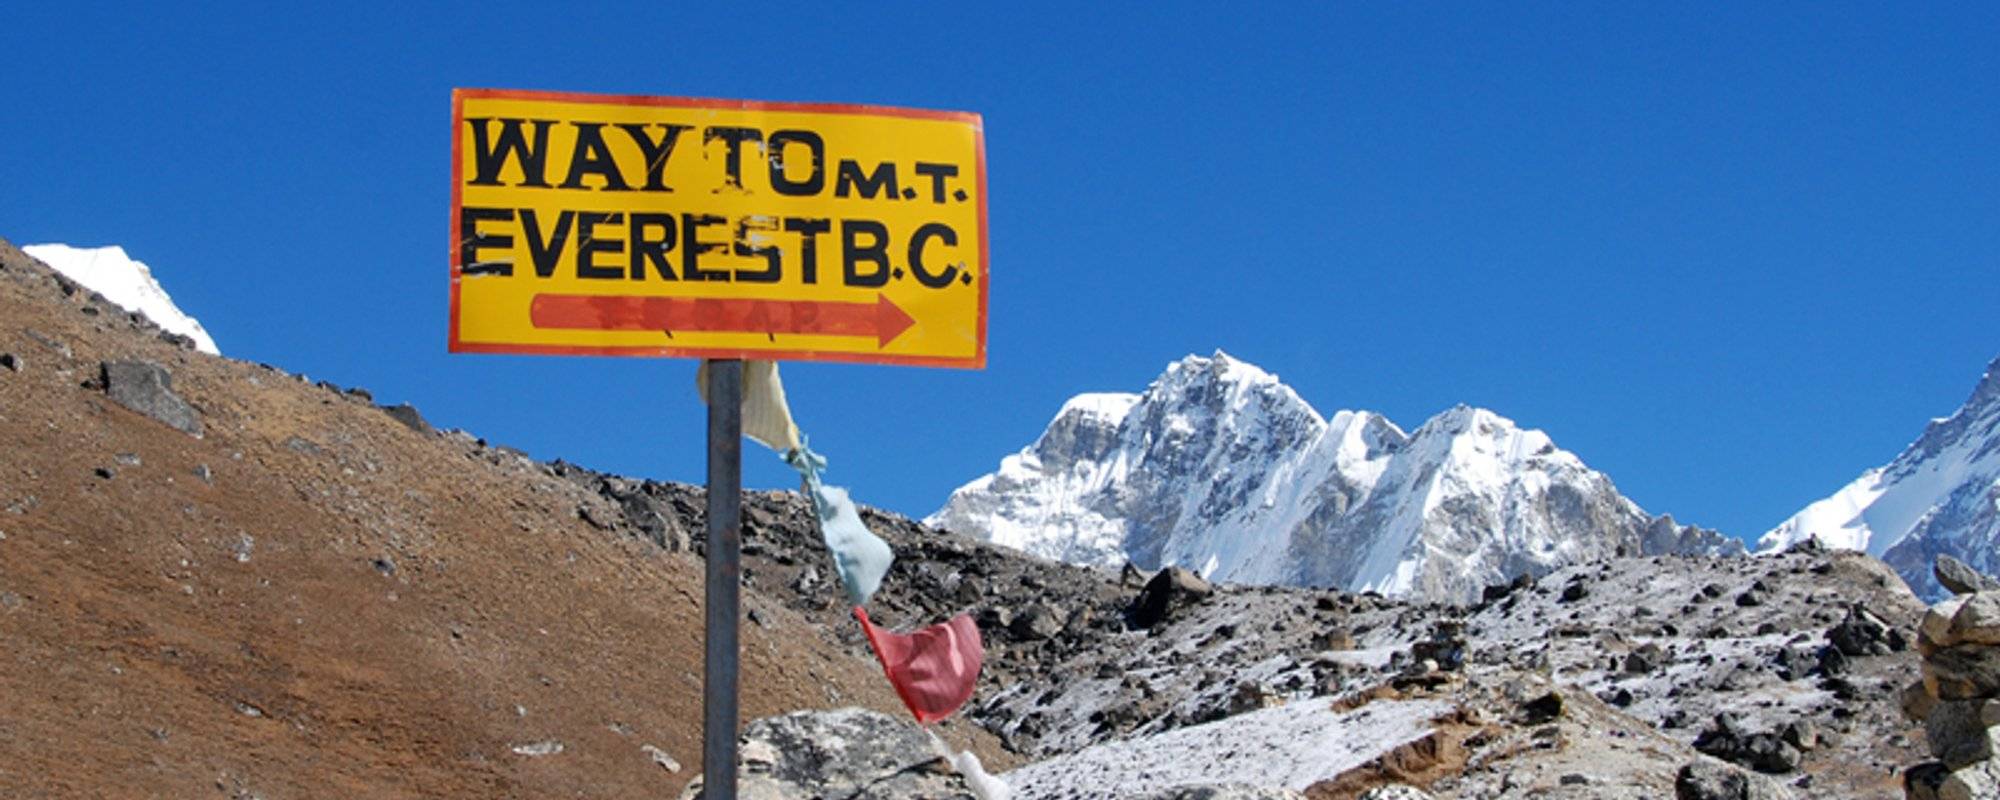 Mt. Everest Base Camp trek - walk among some of the highest mountains in the world